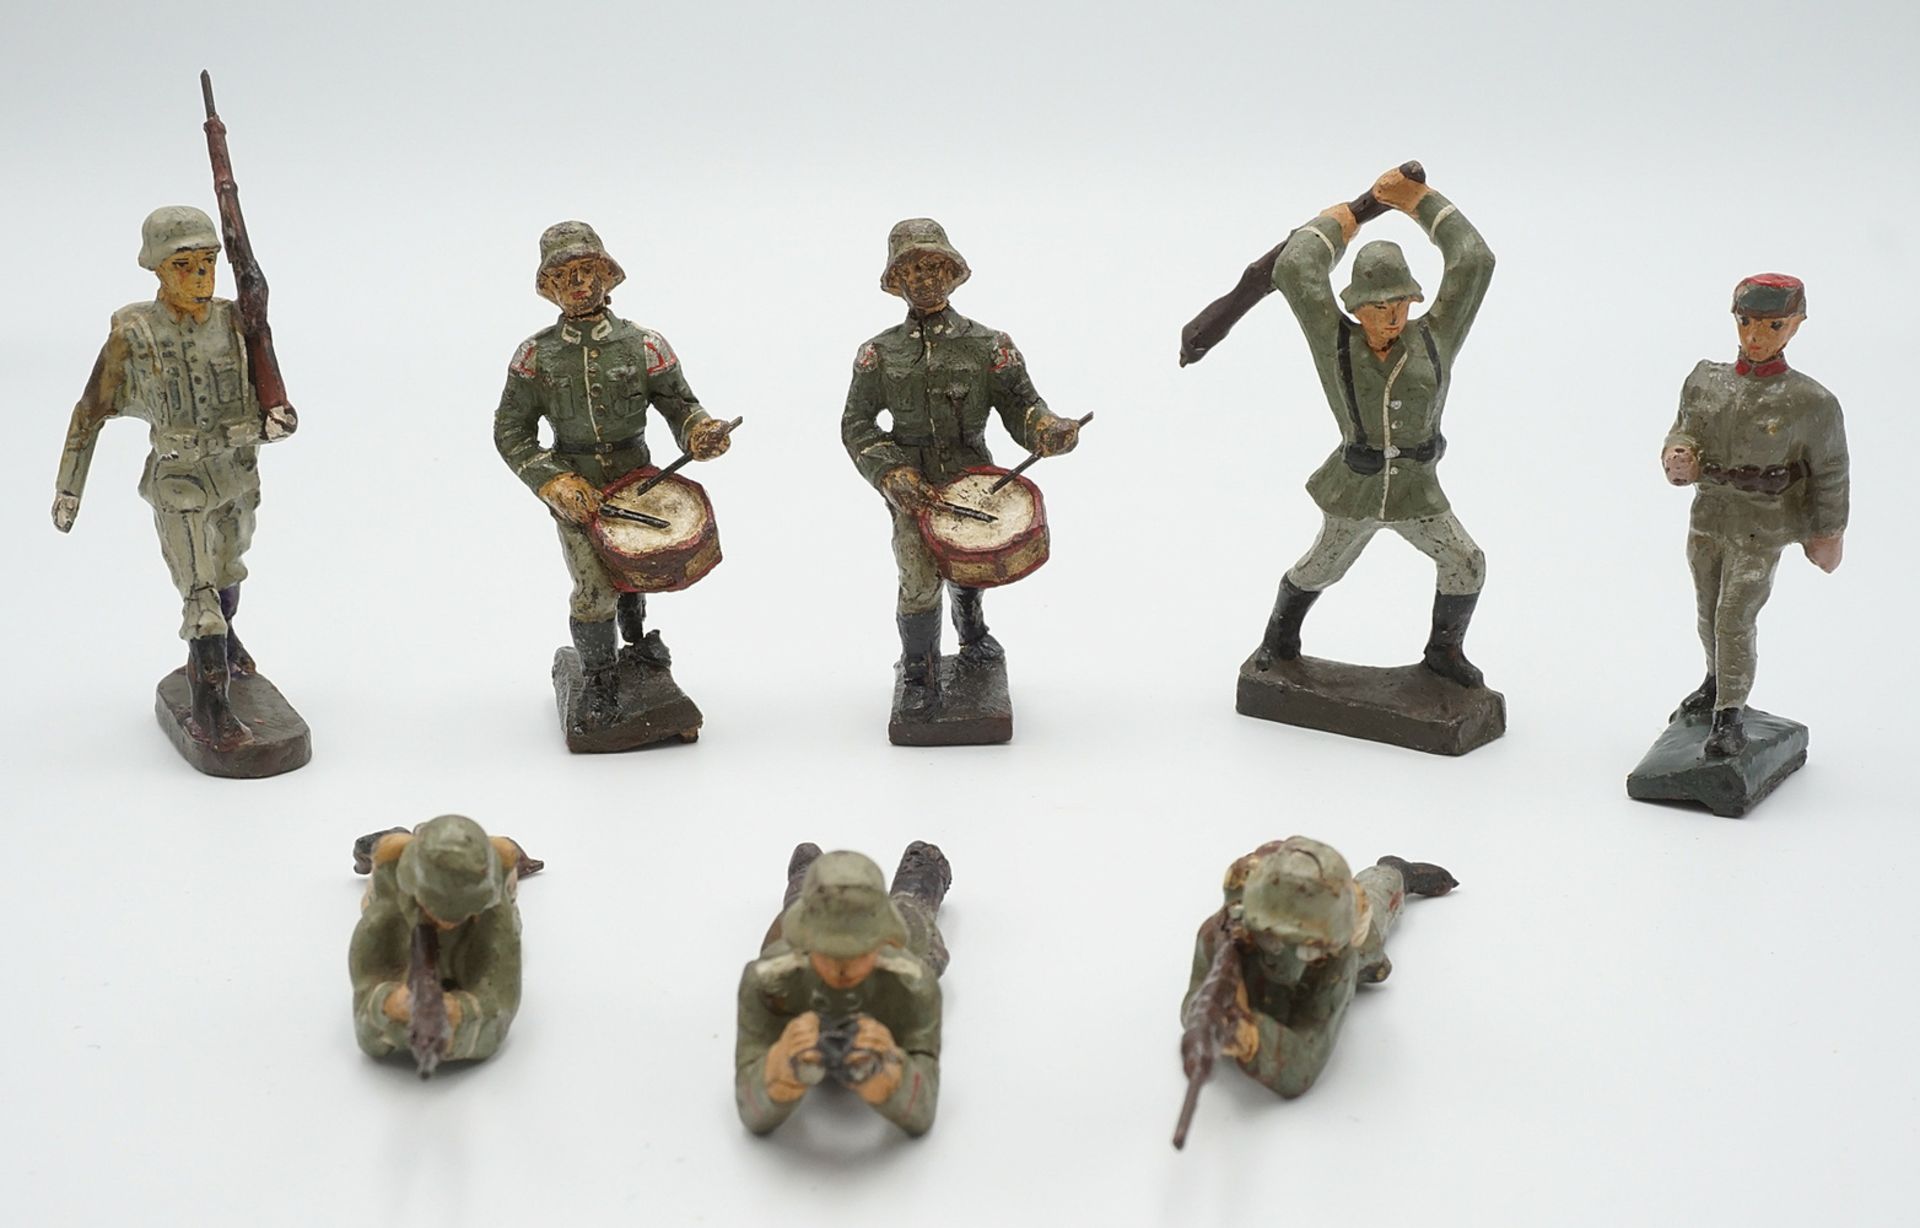 20 soldiers / mass figures - Image 3 of 5